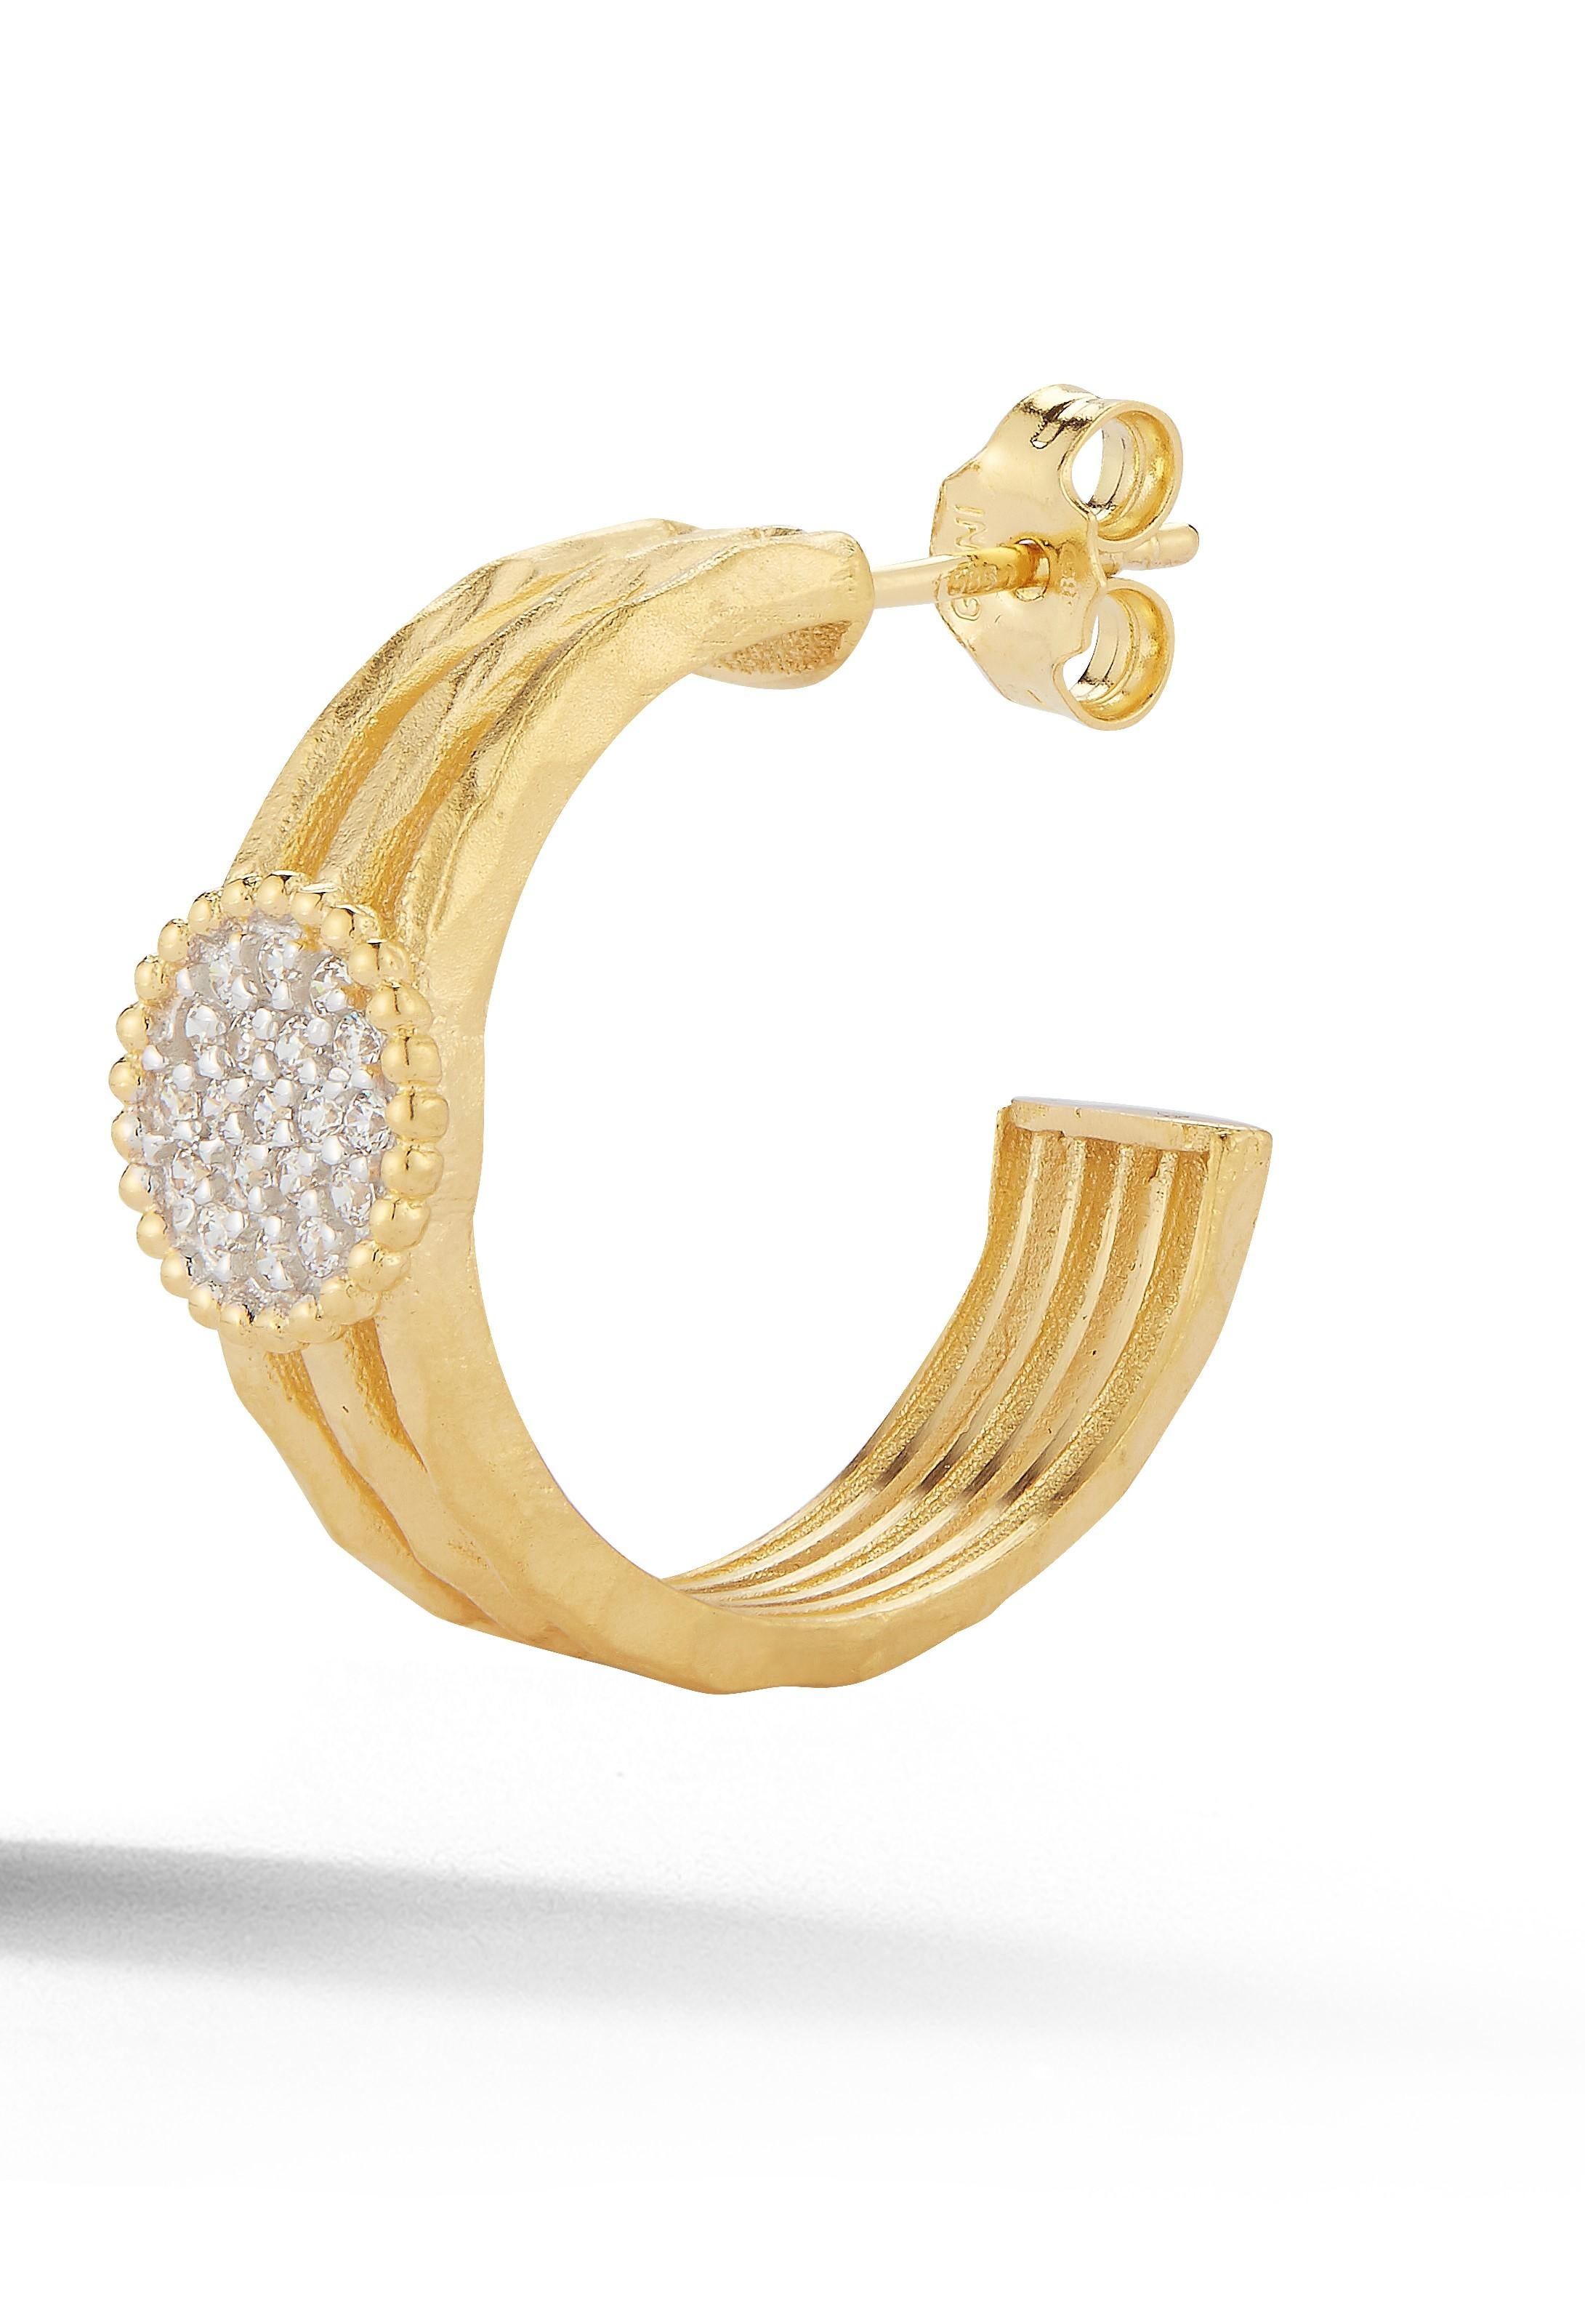 14 Karat Yellow Gold Hand-Crafted Matte and Hammer-Finished Strand Hoop Earrings, Accented with 0.23 Carats of Pave Set Diamond Circles.
